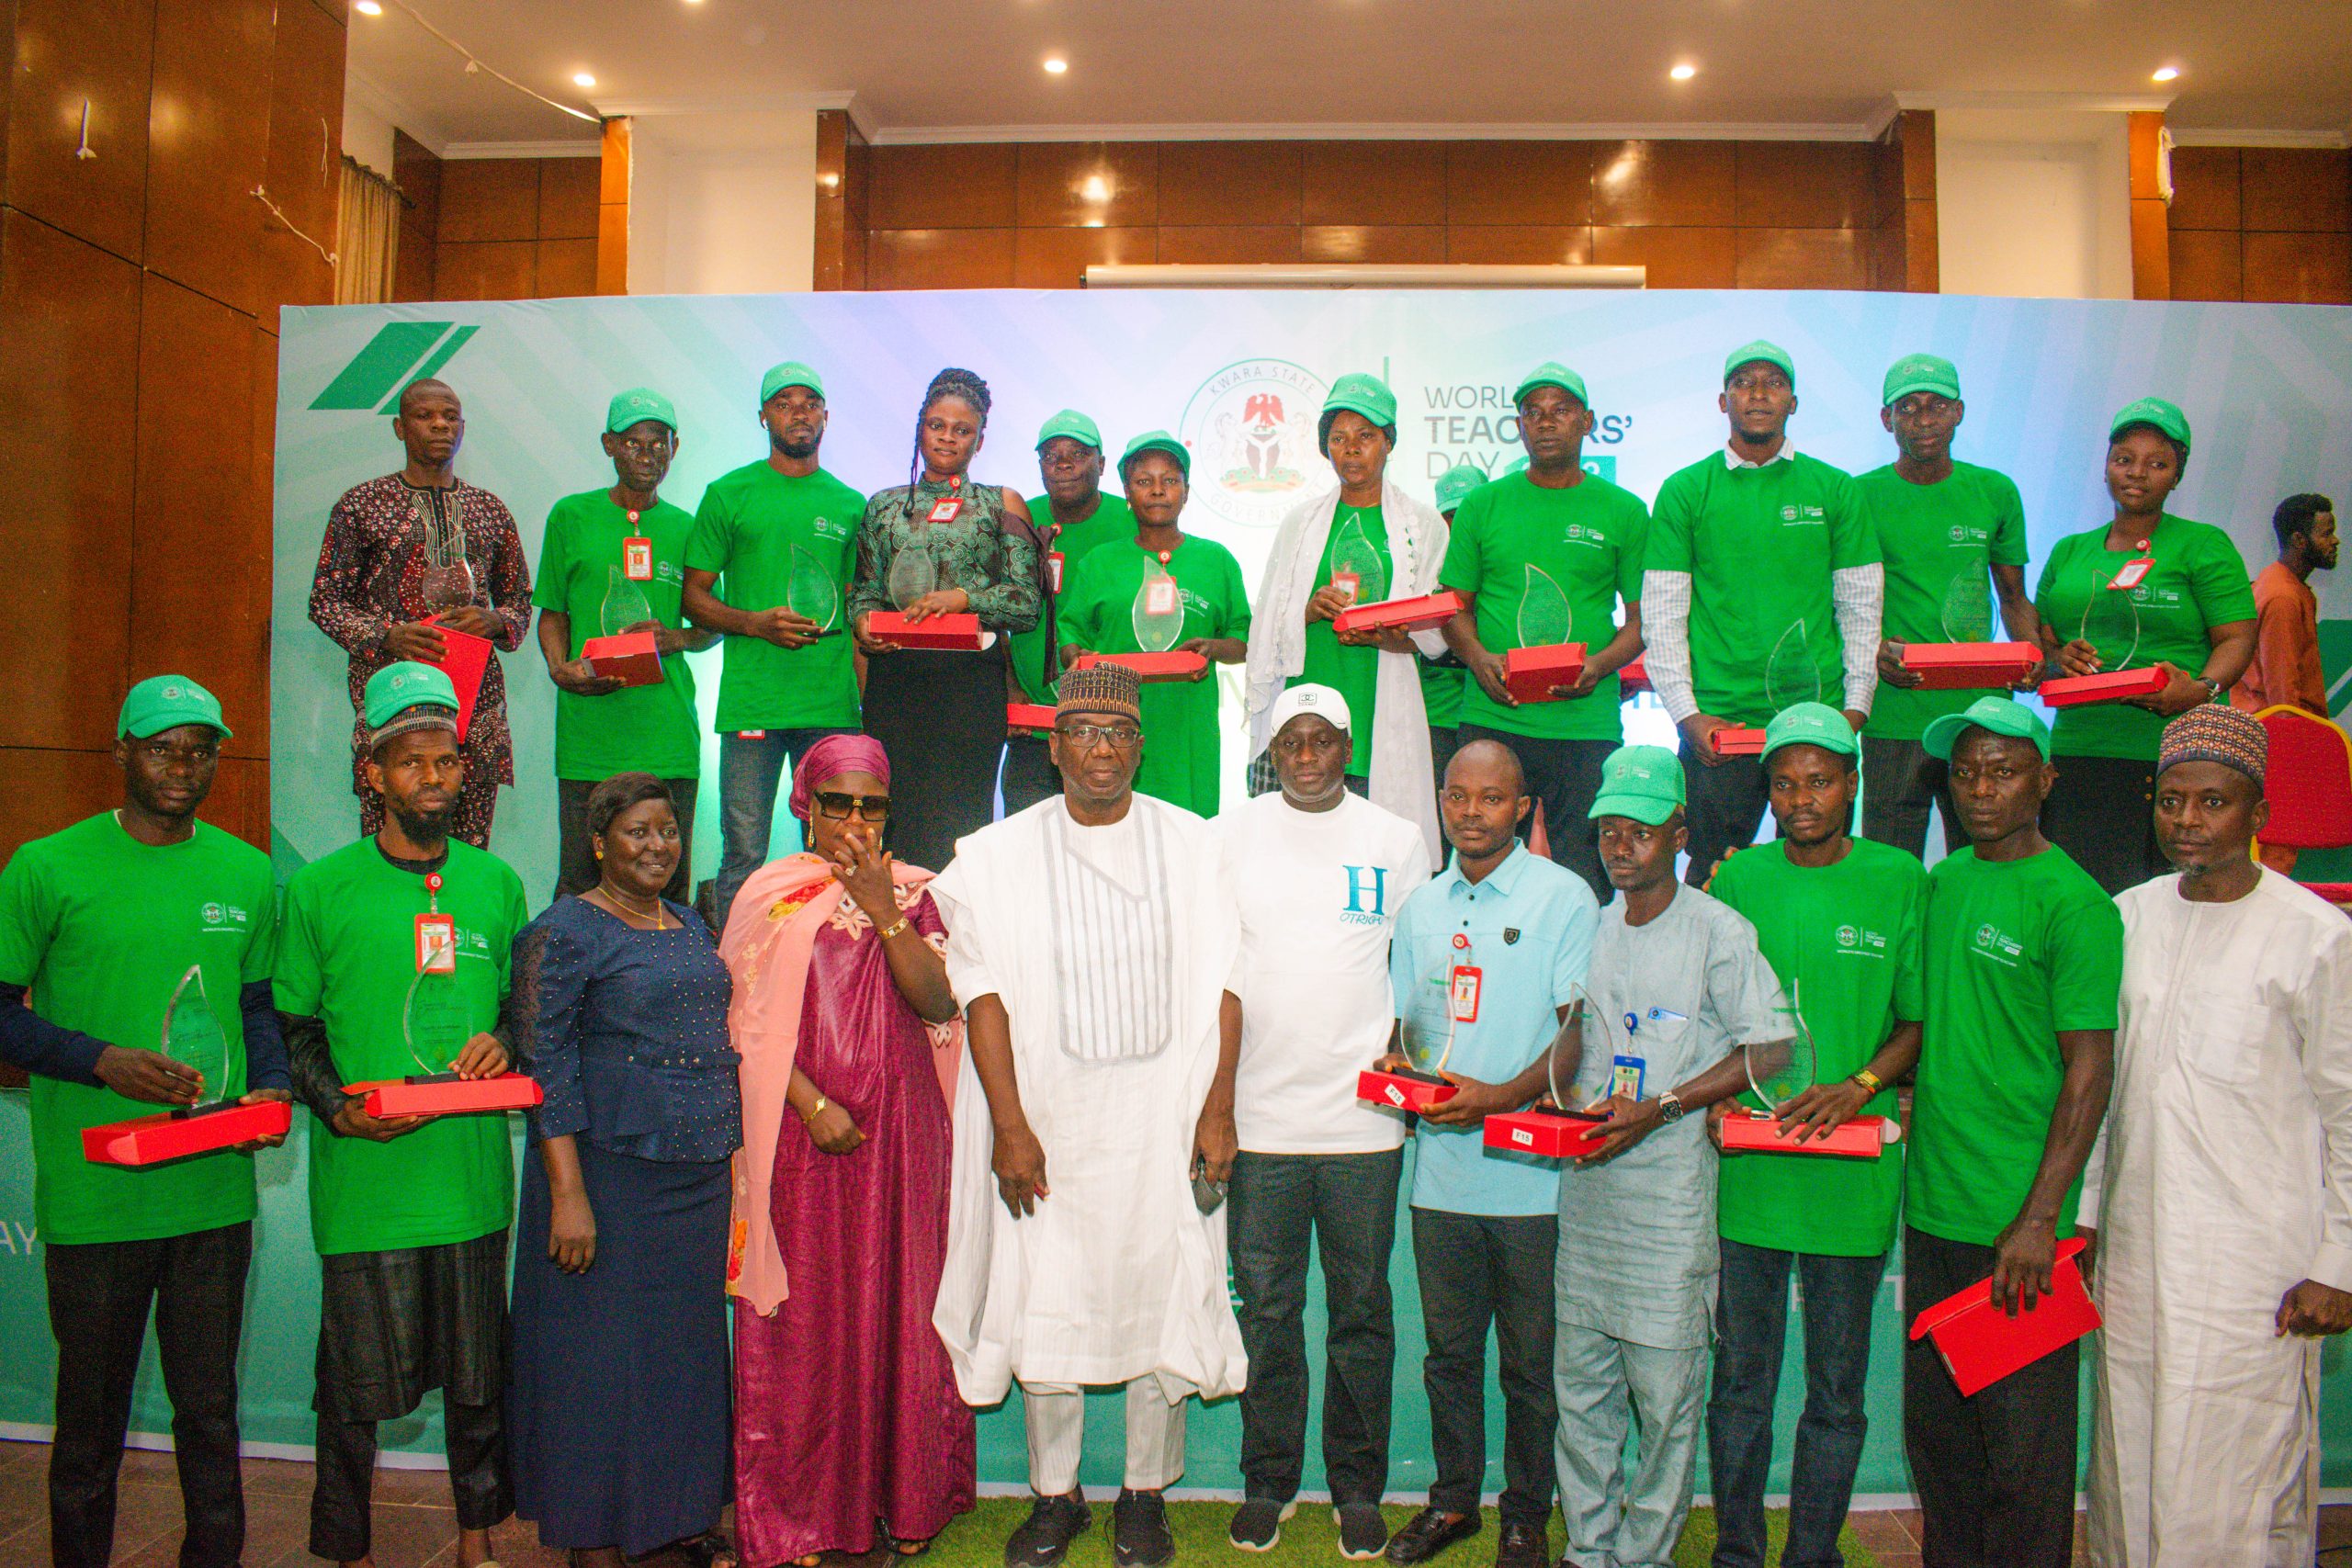 Governor AbdulRahman AbdulRazaq of Kwara State standing with a group of teachers who were honored for their outstanding contributions to the teaching profession.